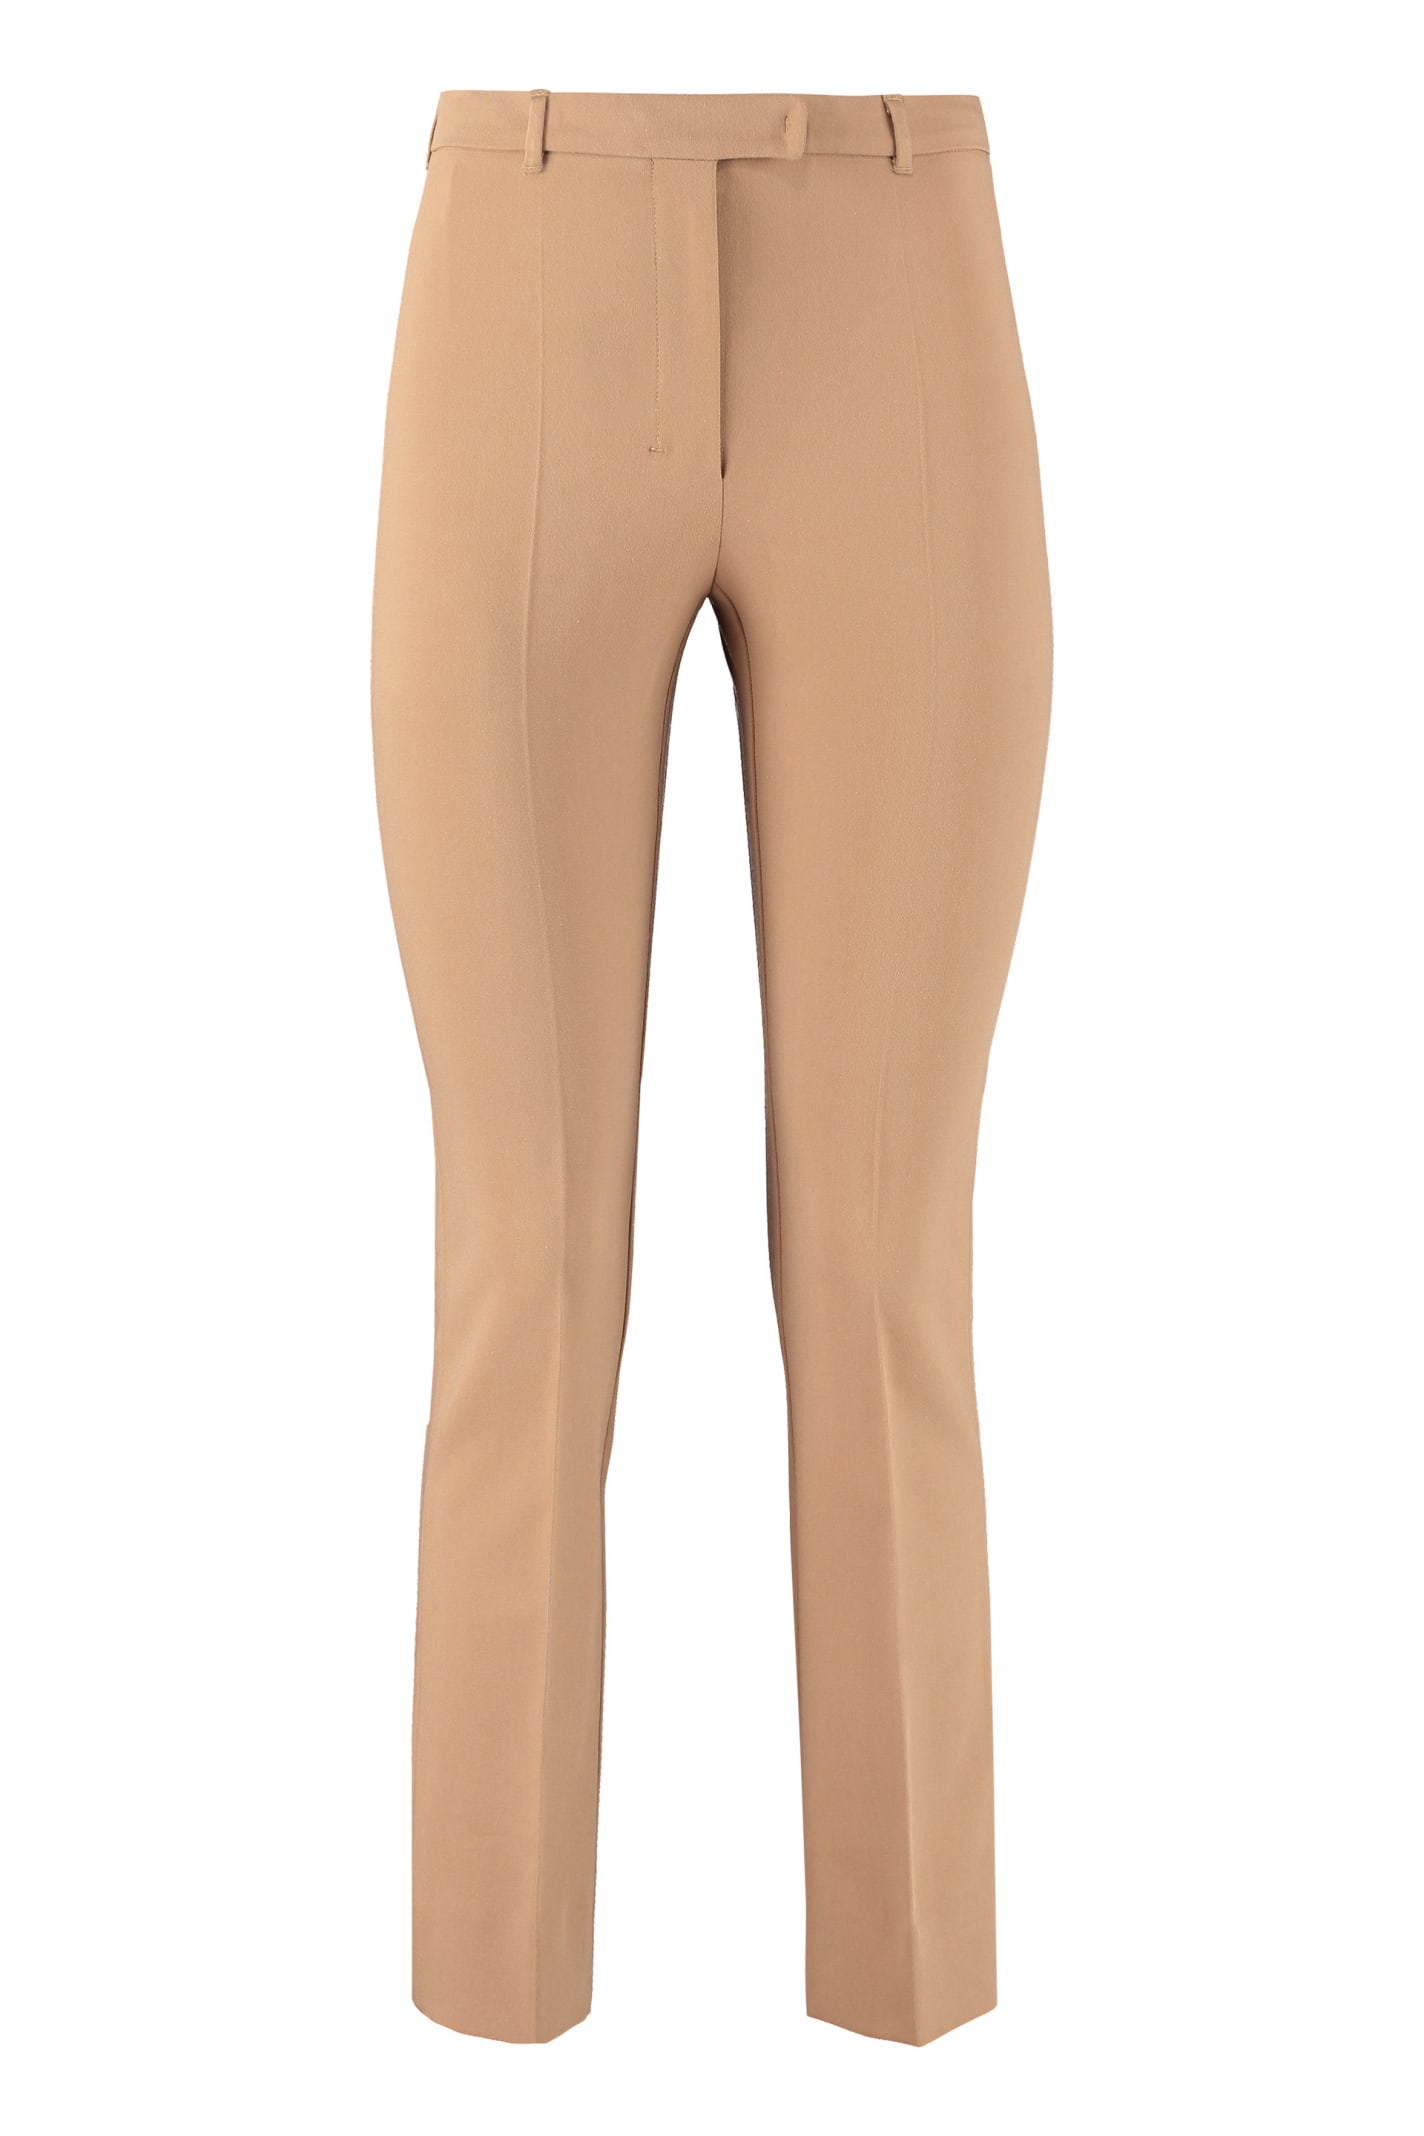 Shop 's Max Mara Fatina Cropped Trousers In Camel